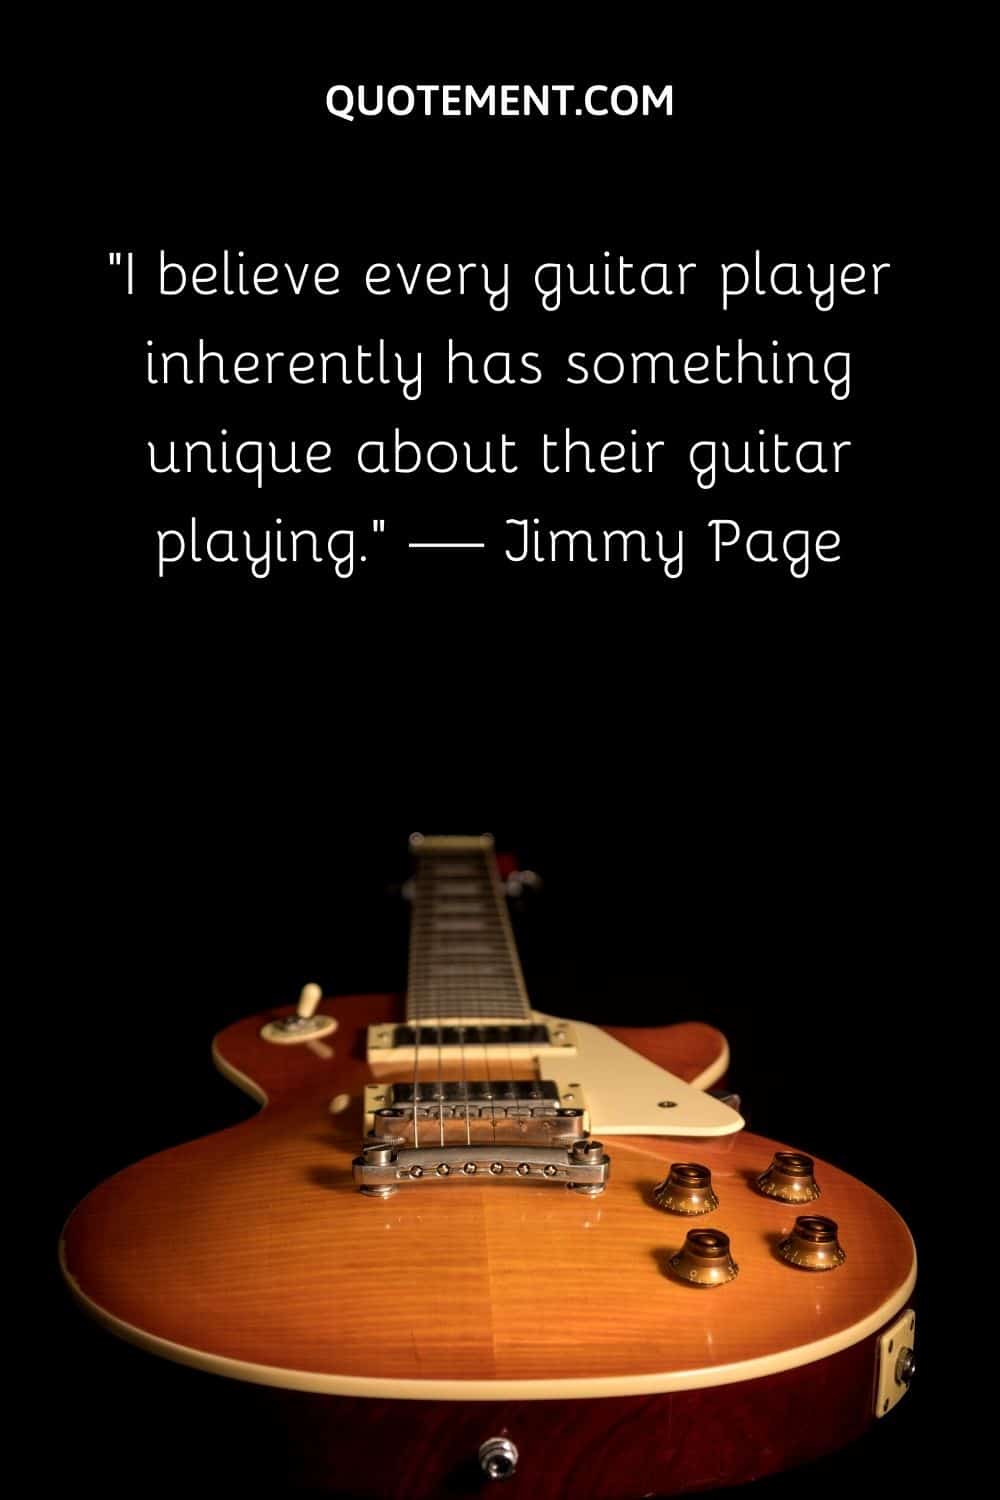 I believe every guitar player inherently has something unique about their guitar playing.